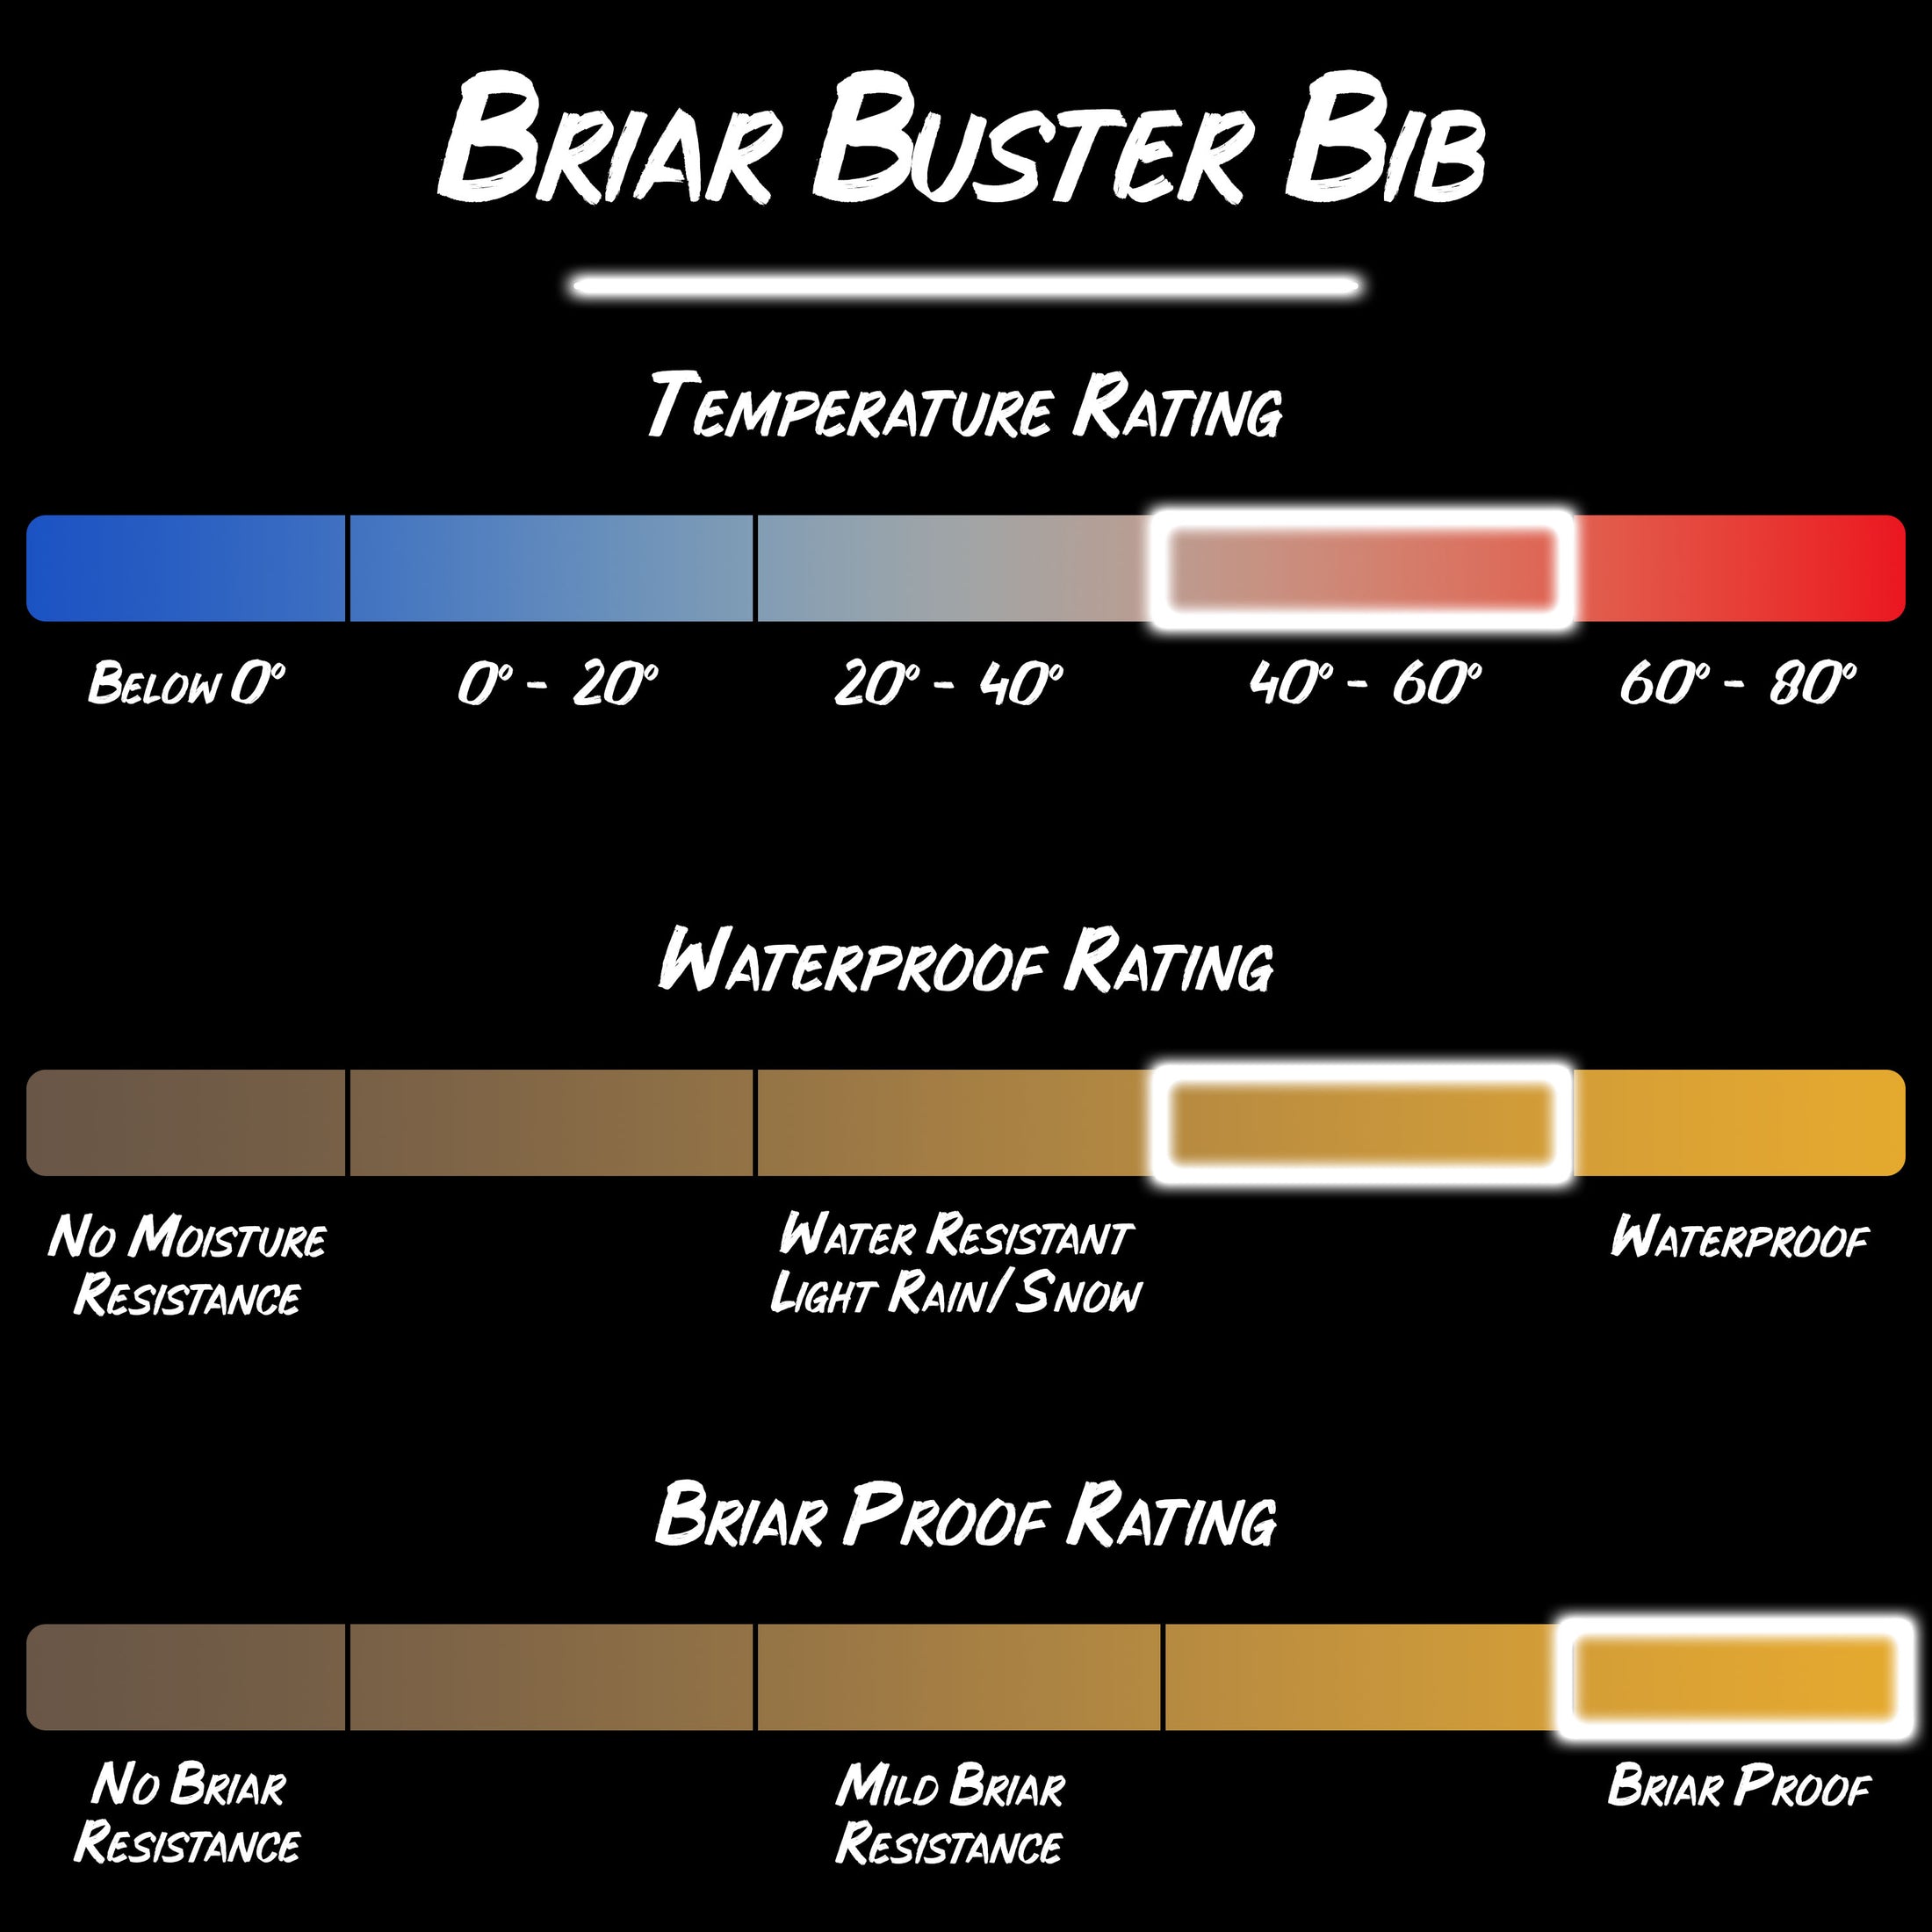 Gamehide briar buster bib product specifications.